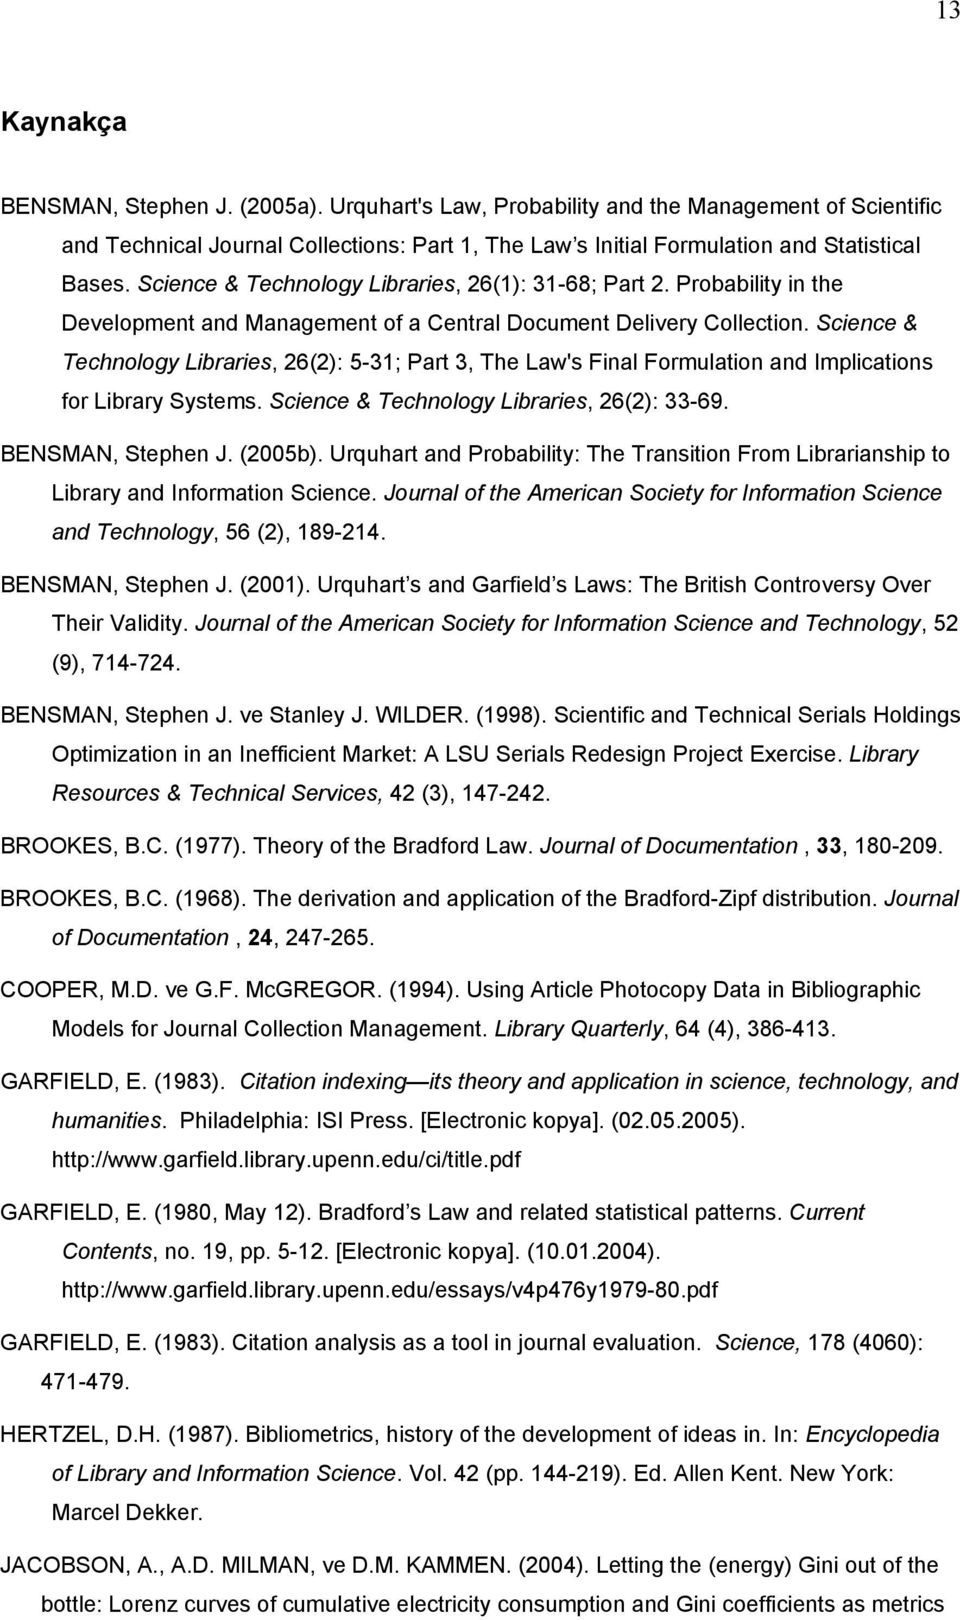 Science & Technology Libraries, 26(2): 5-31; Part 3, The Law's Final Formulation and Implications for Library Systems. Science & Technology Libraries, 26(2): 33-69. BENSMAN, Stephen J. (2005b).